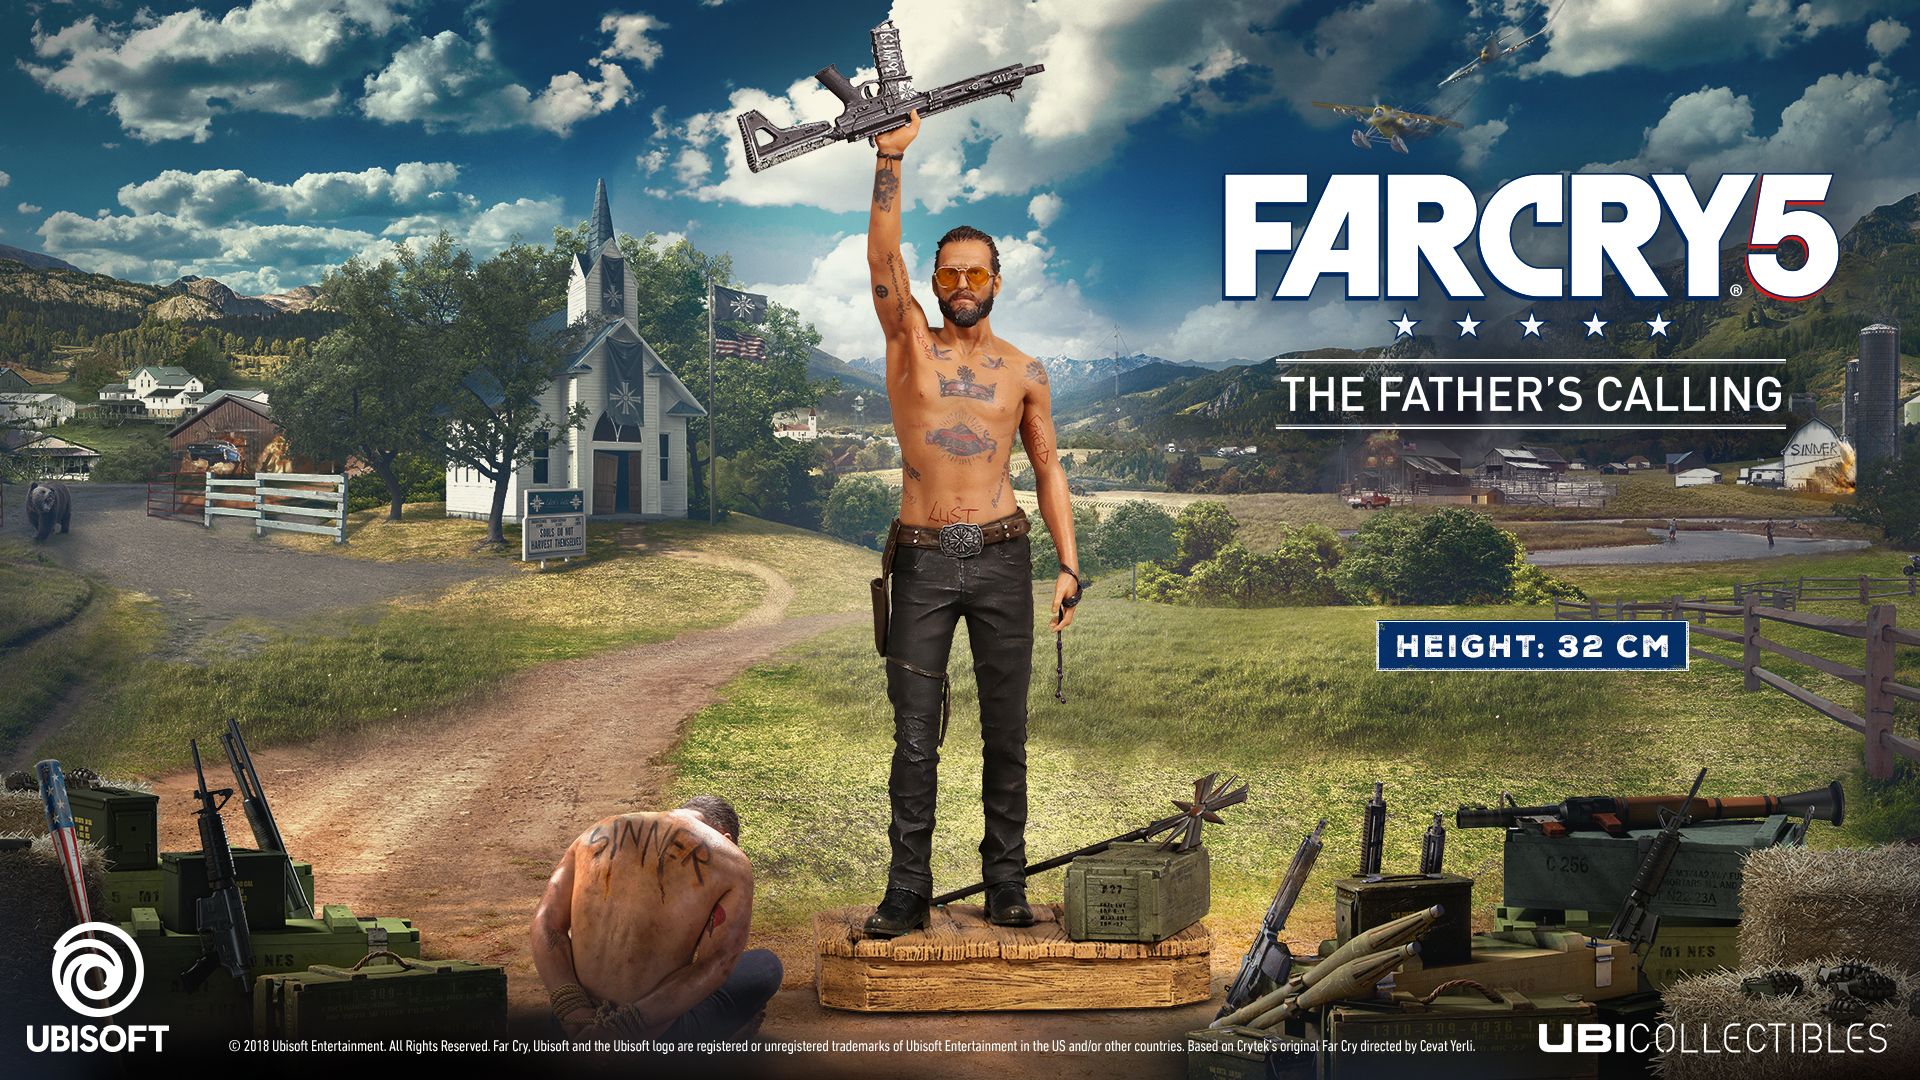 Far Cry 5 Joseph Seed Character Figurine Releasing With Game For $70